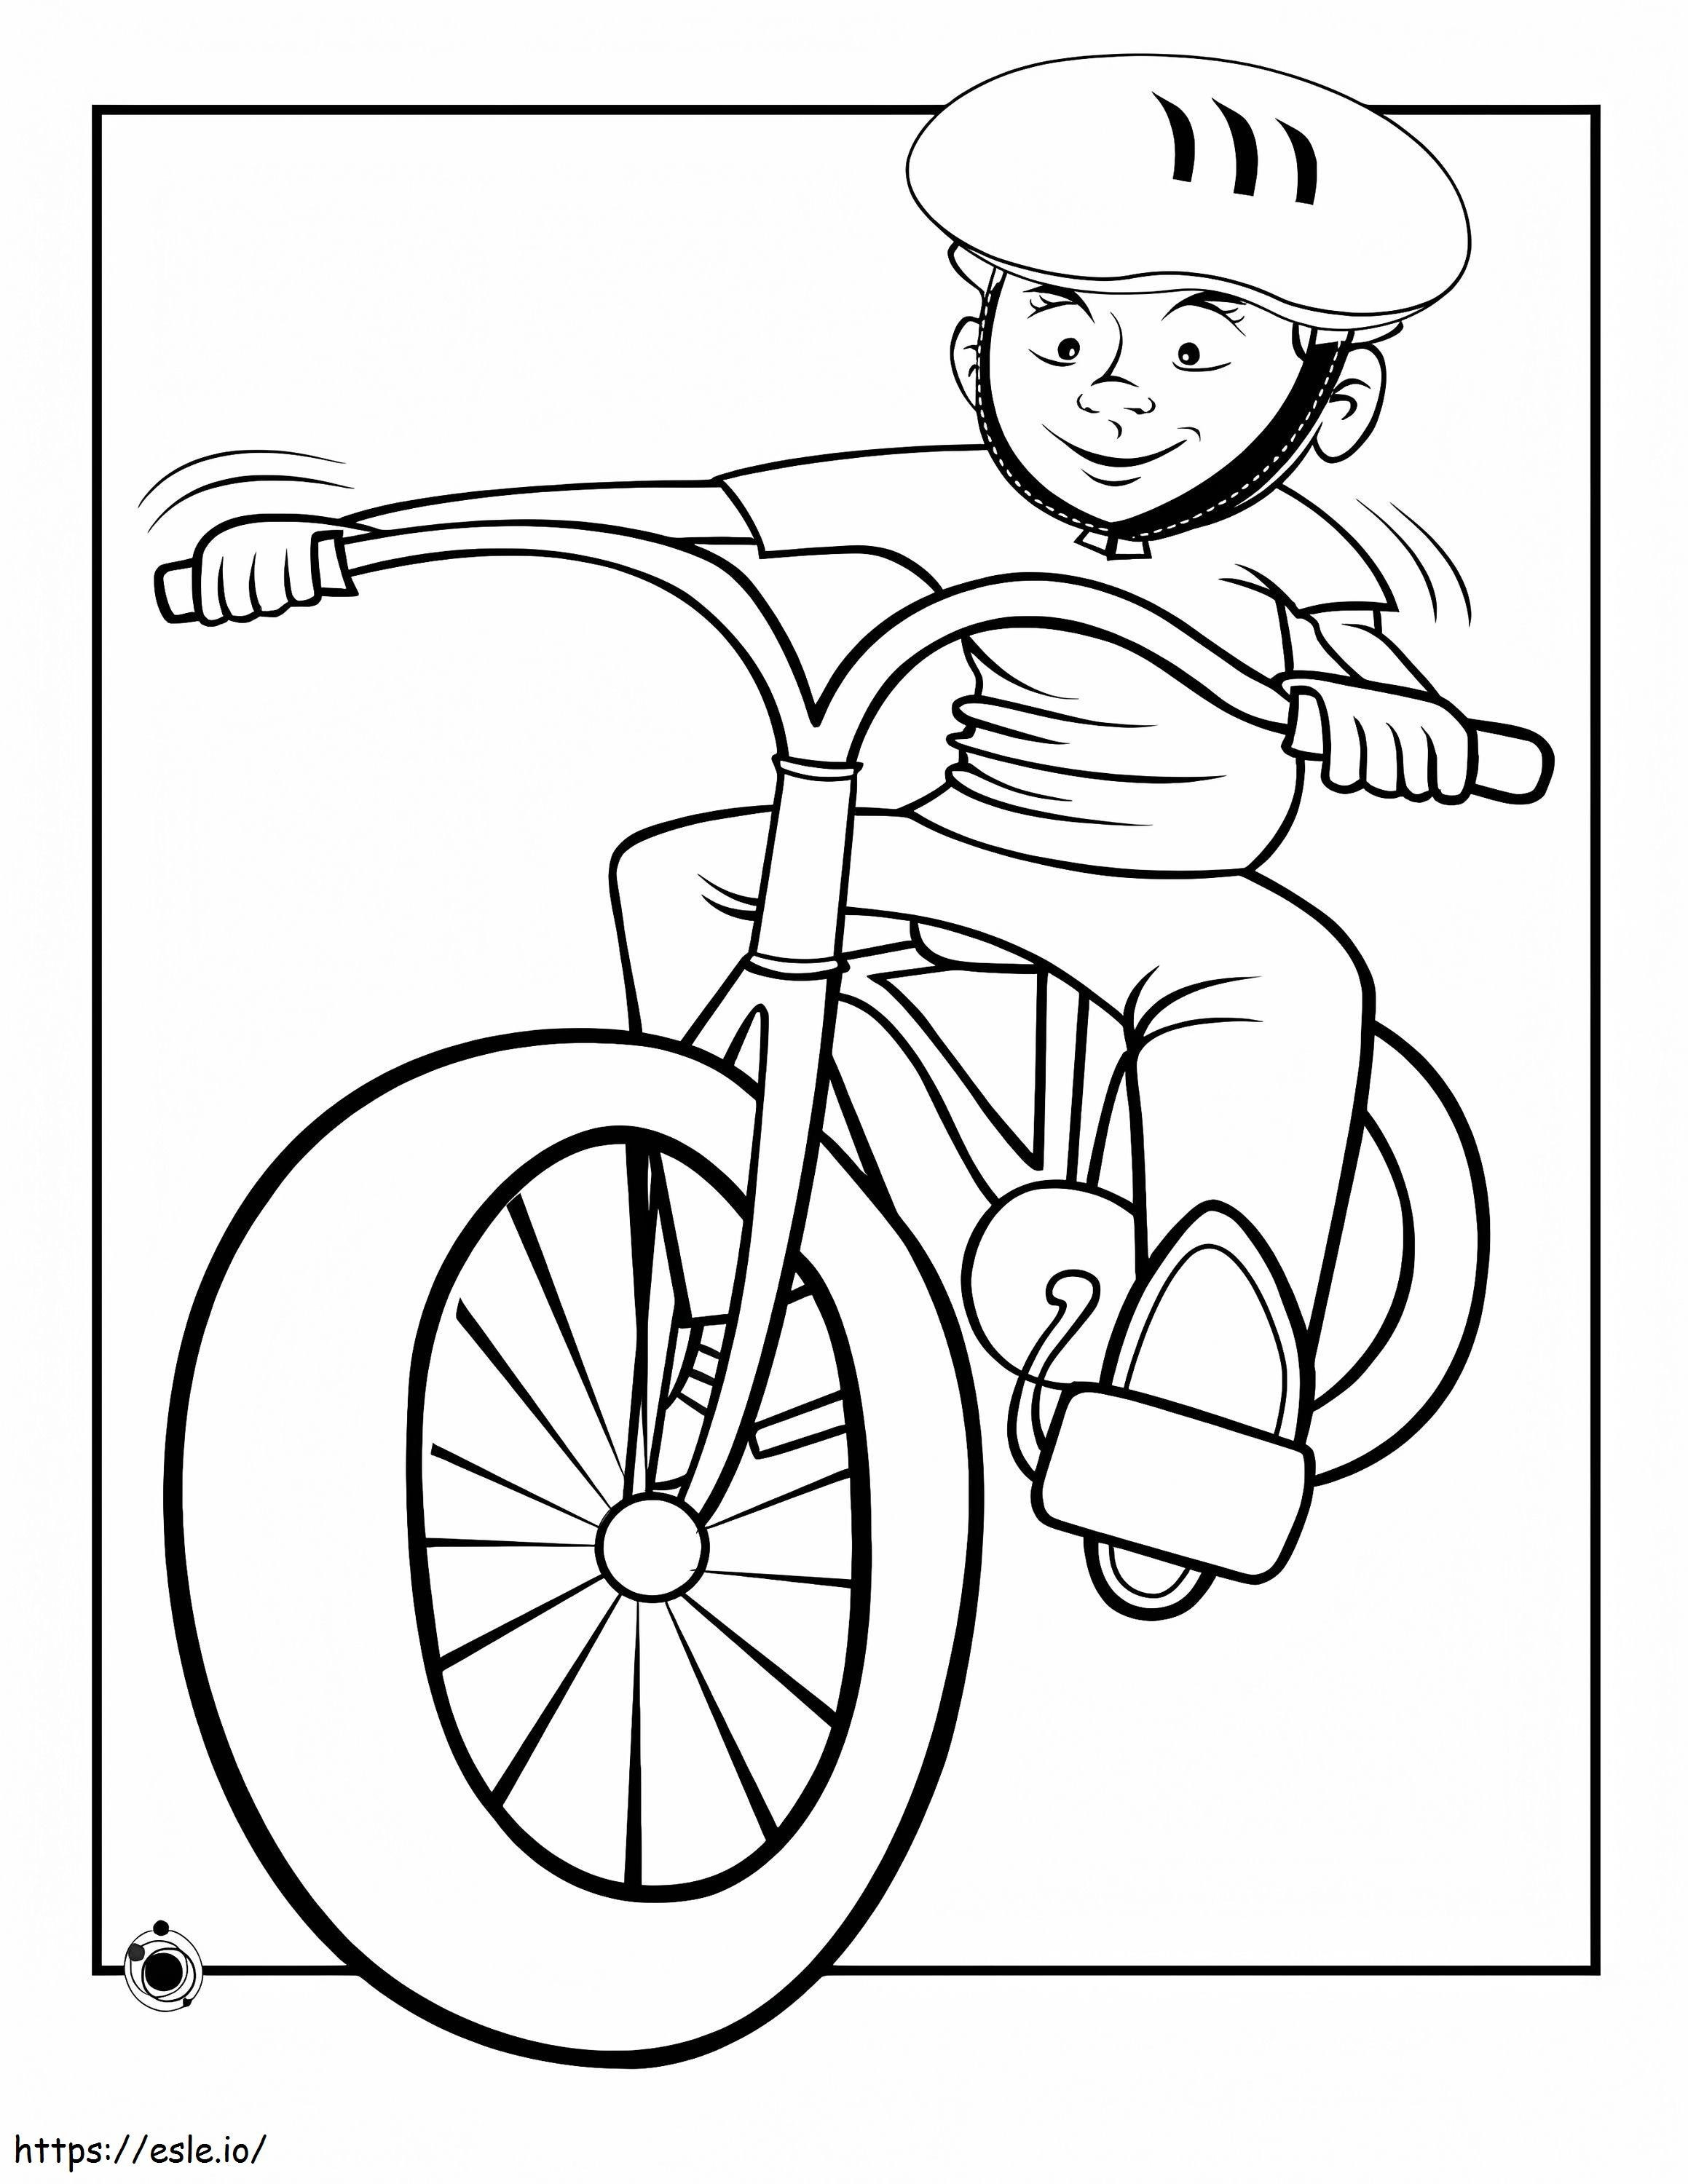 B Is For Bicycle coloring page